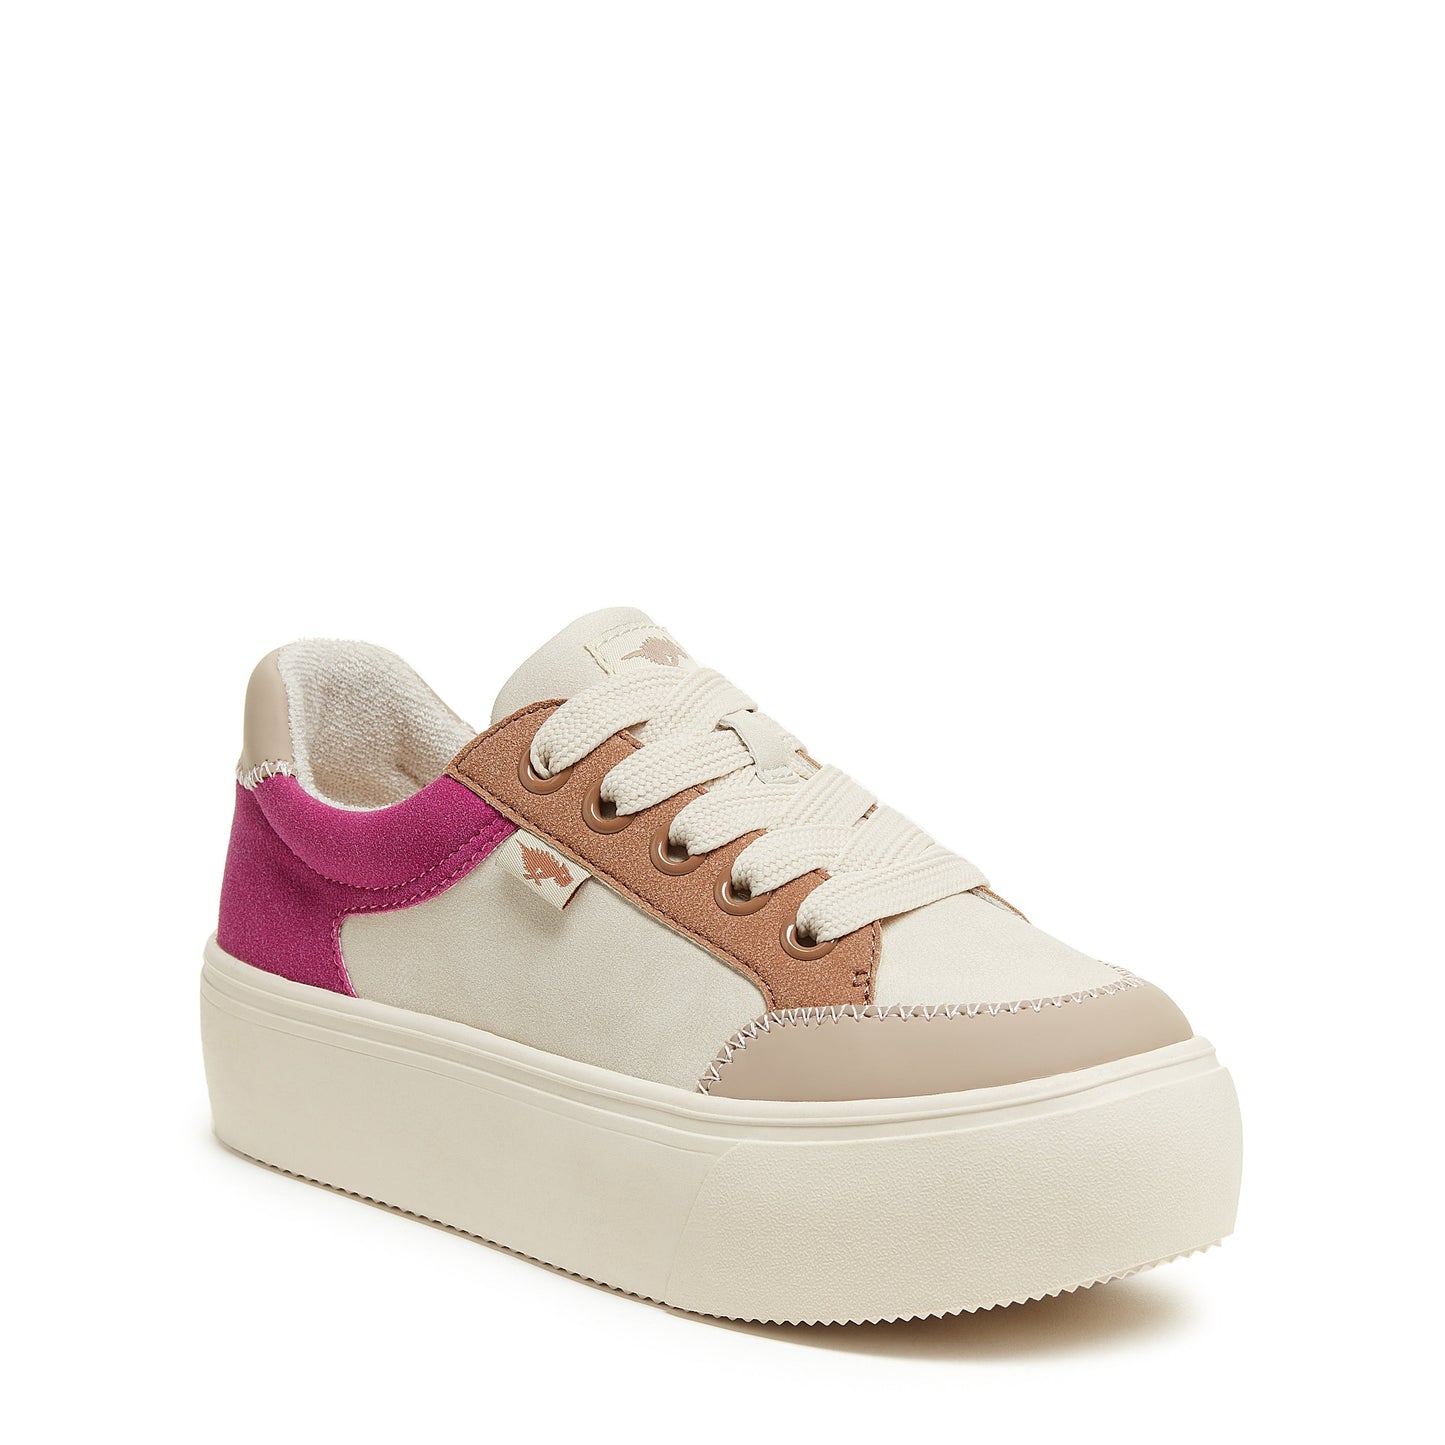 Flame Cream Color Block Trainers